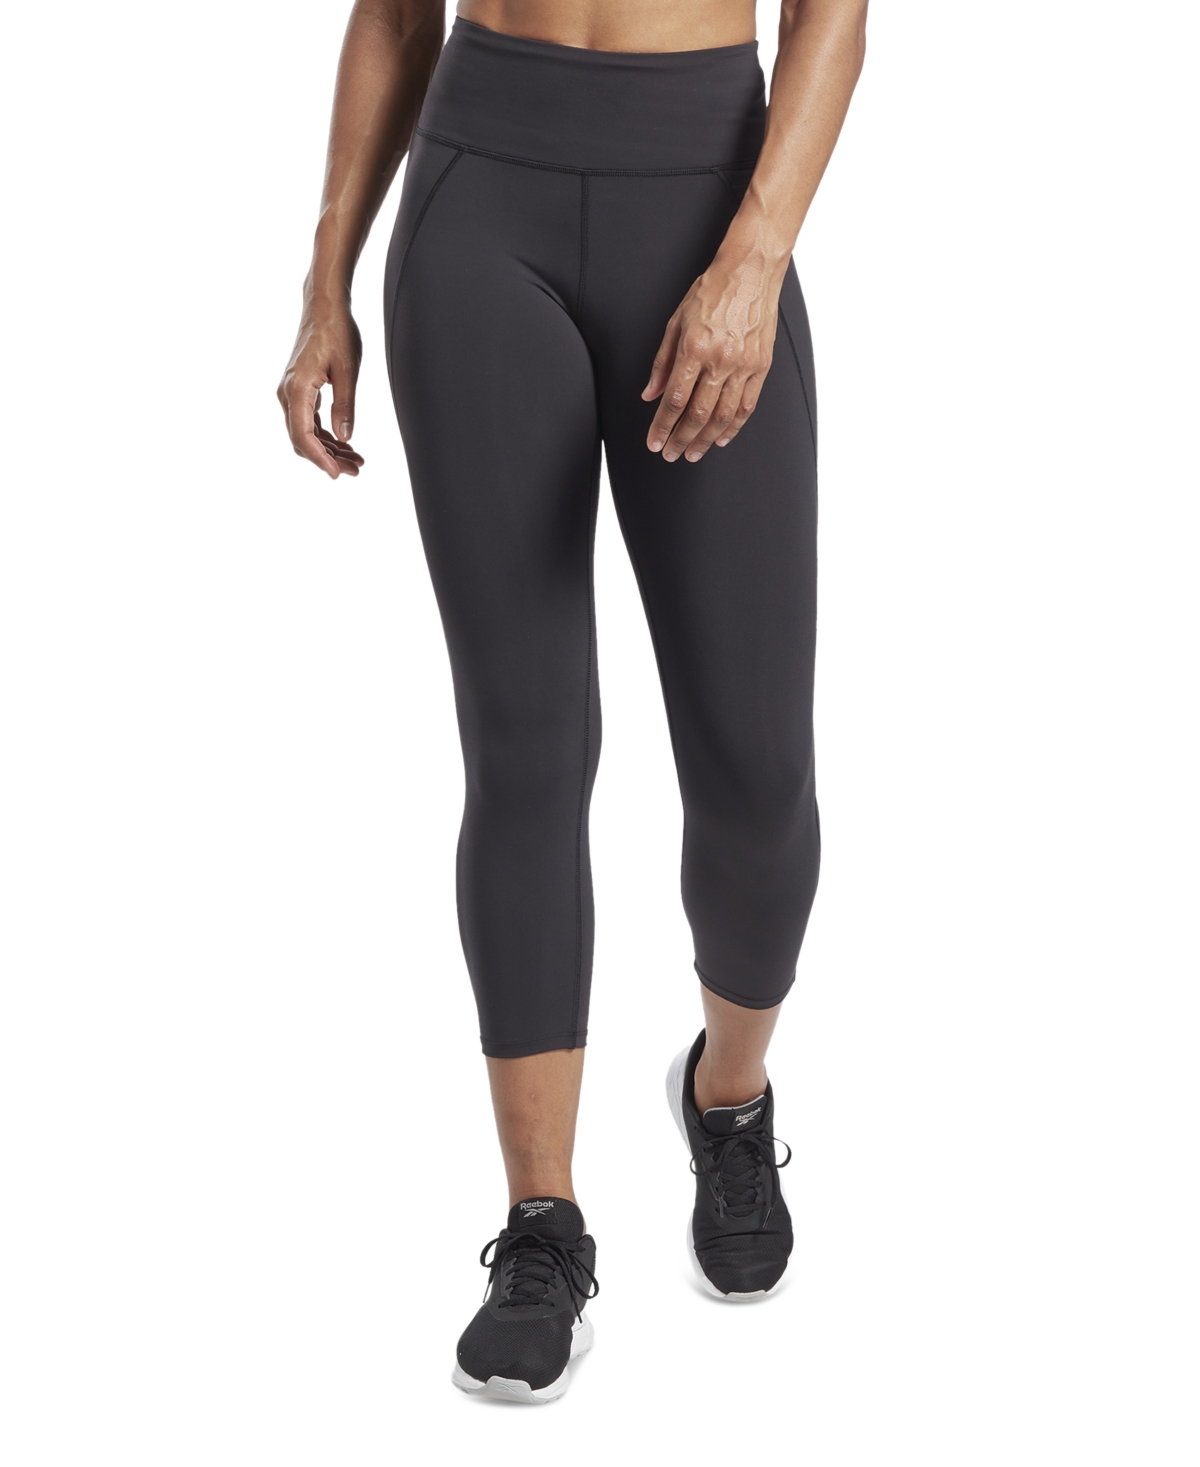 Women's Lux High-Rise Pull-On 3/4 Leggings, A Macy's Exclusive - Black